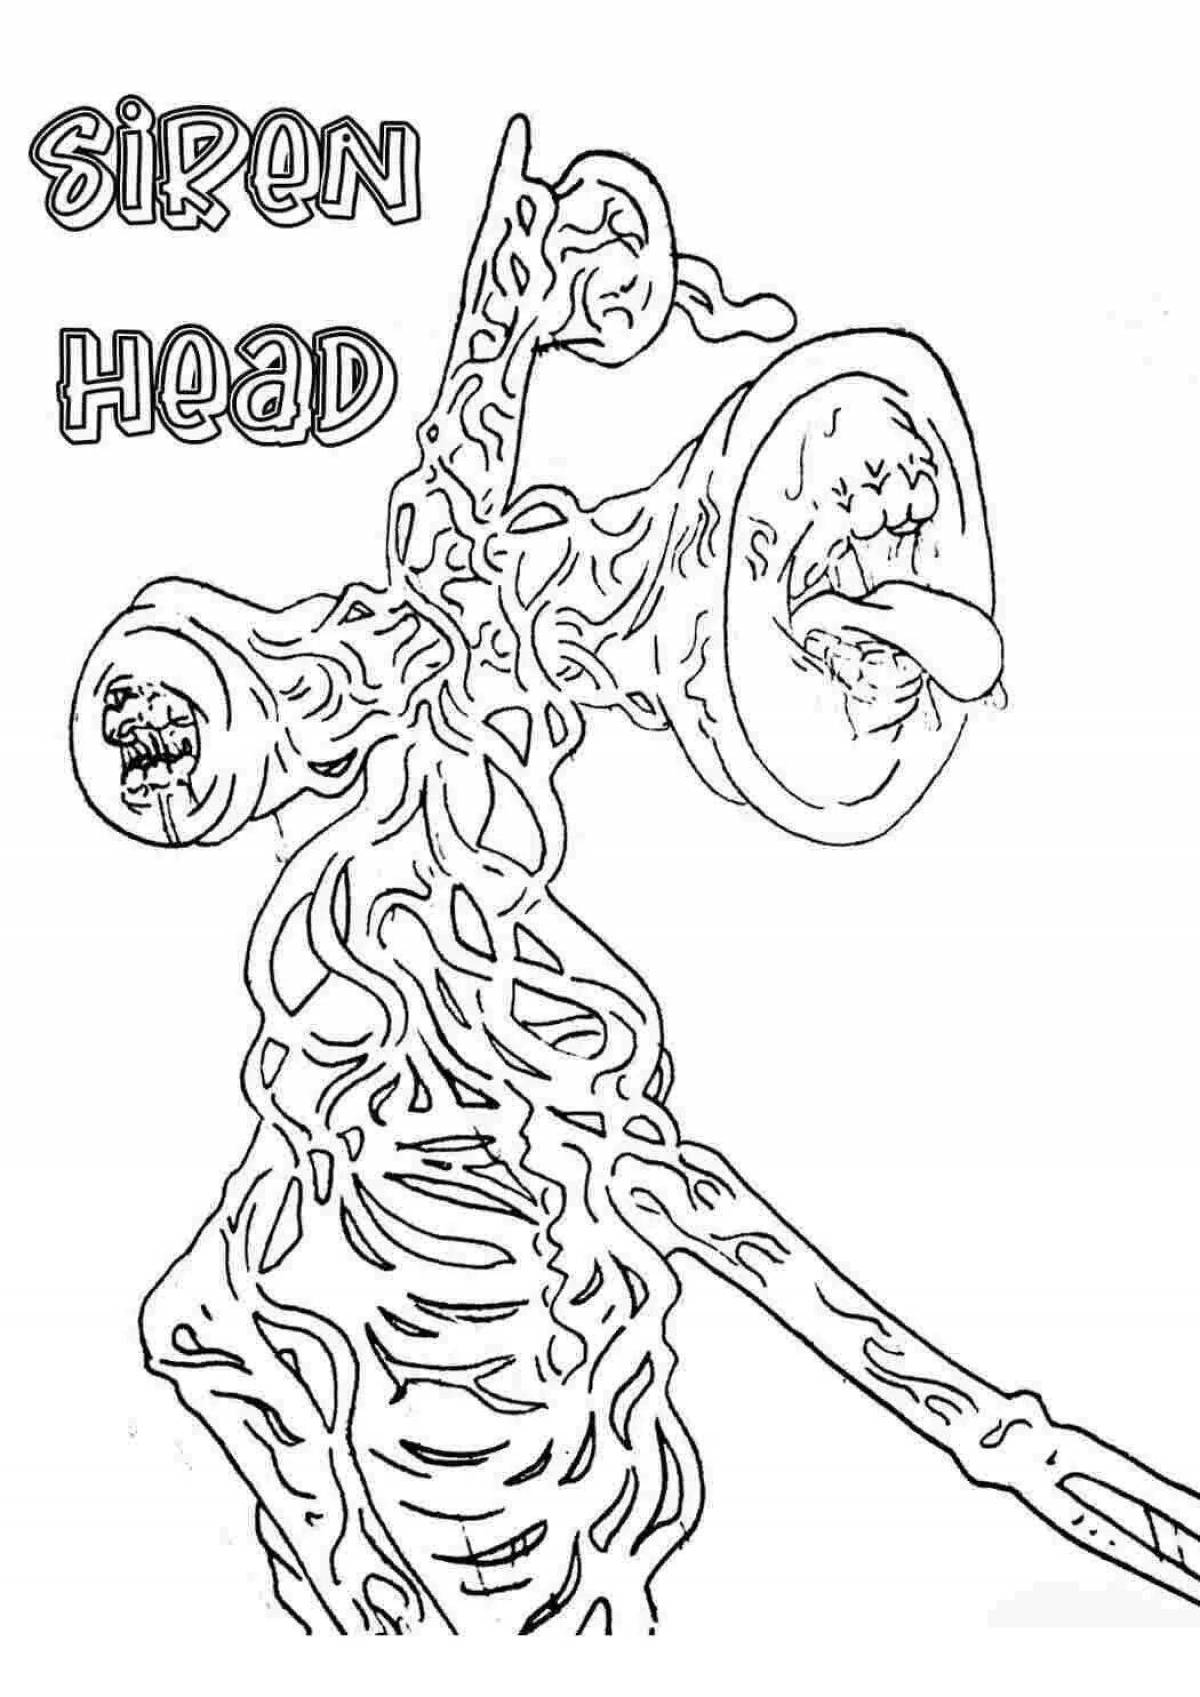 Siren head art coloring page